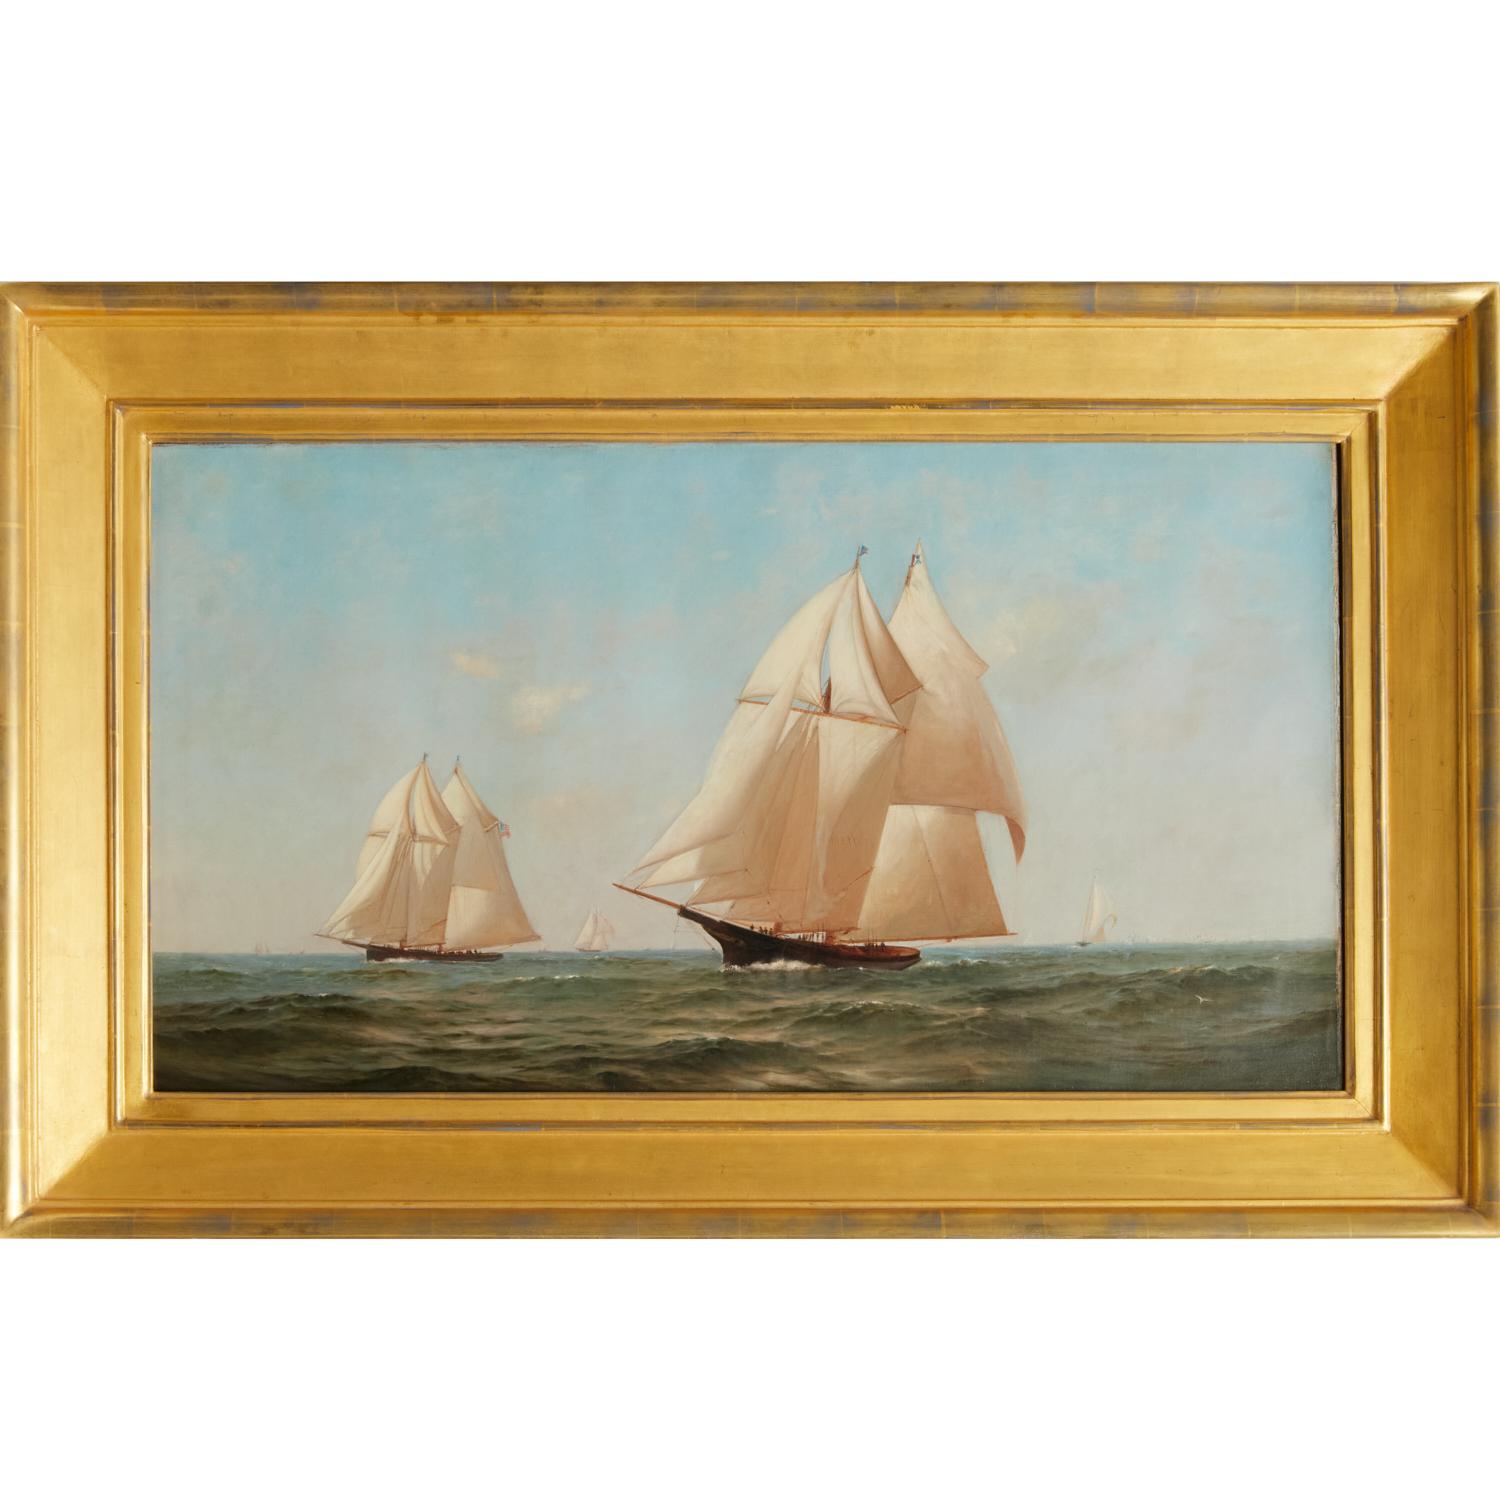 Antique Signed Oil on Canvas Warren W. Sheppard, Likely an America's Cup Race  For Sale 4